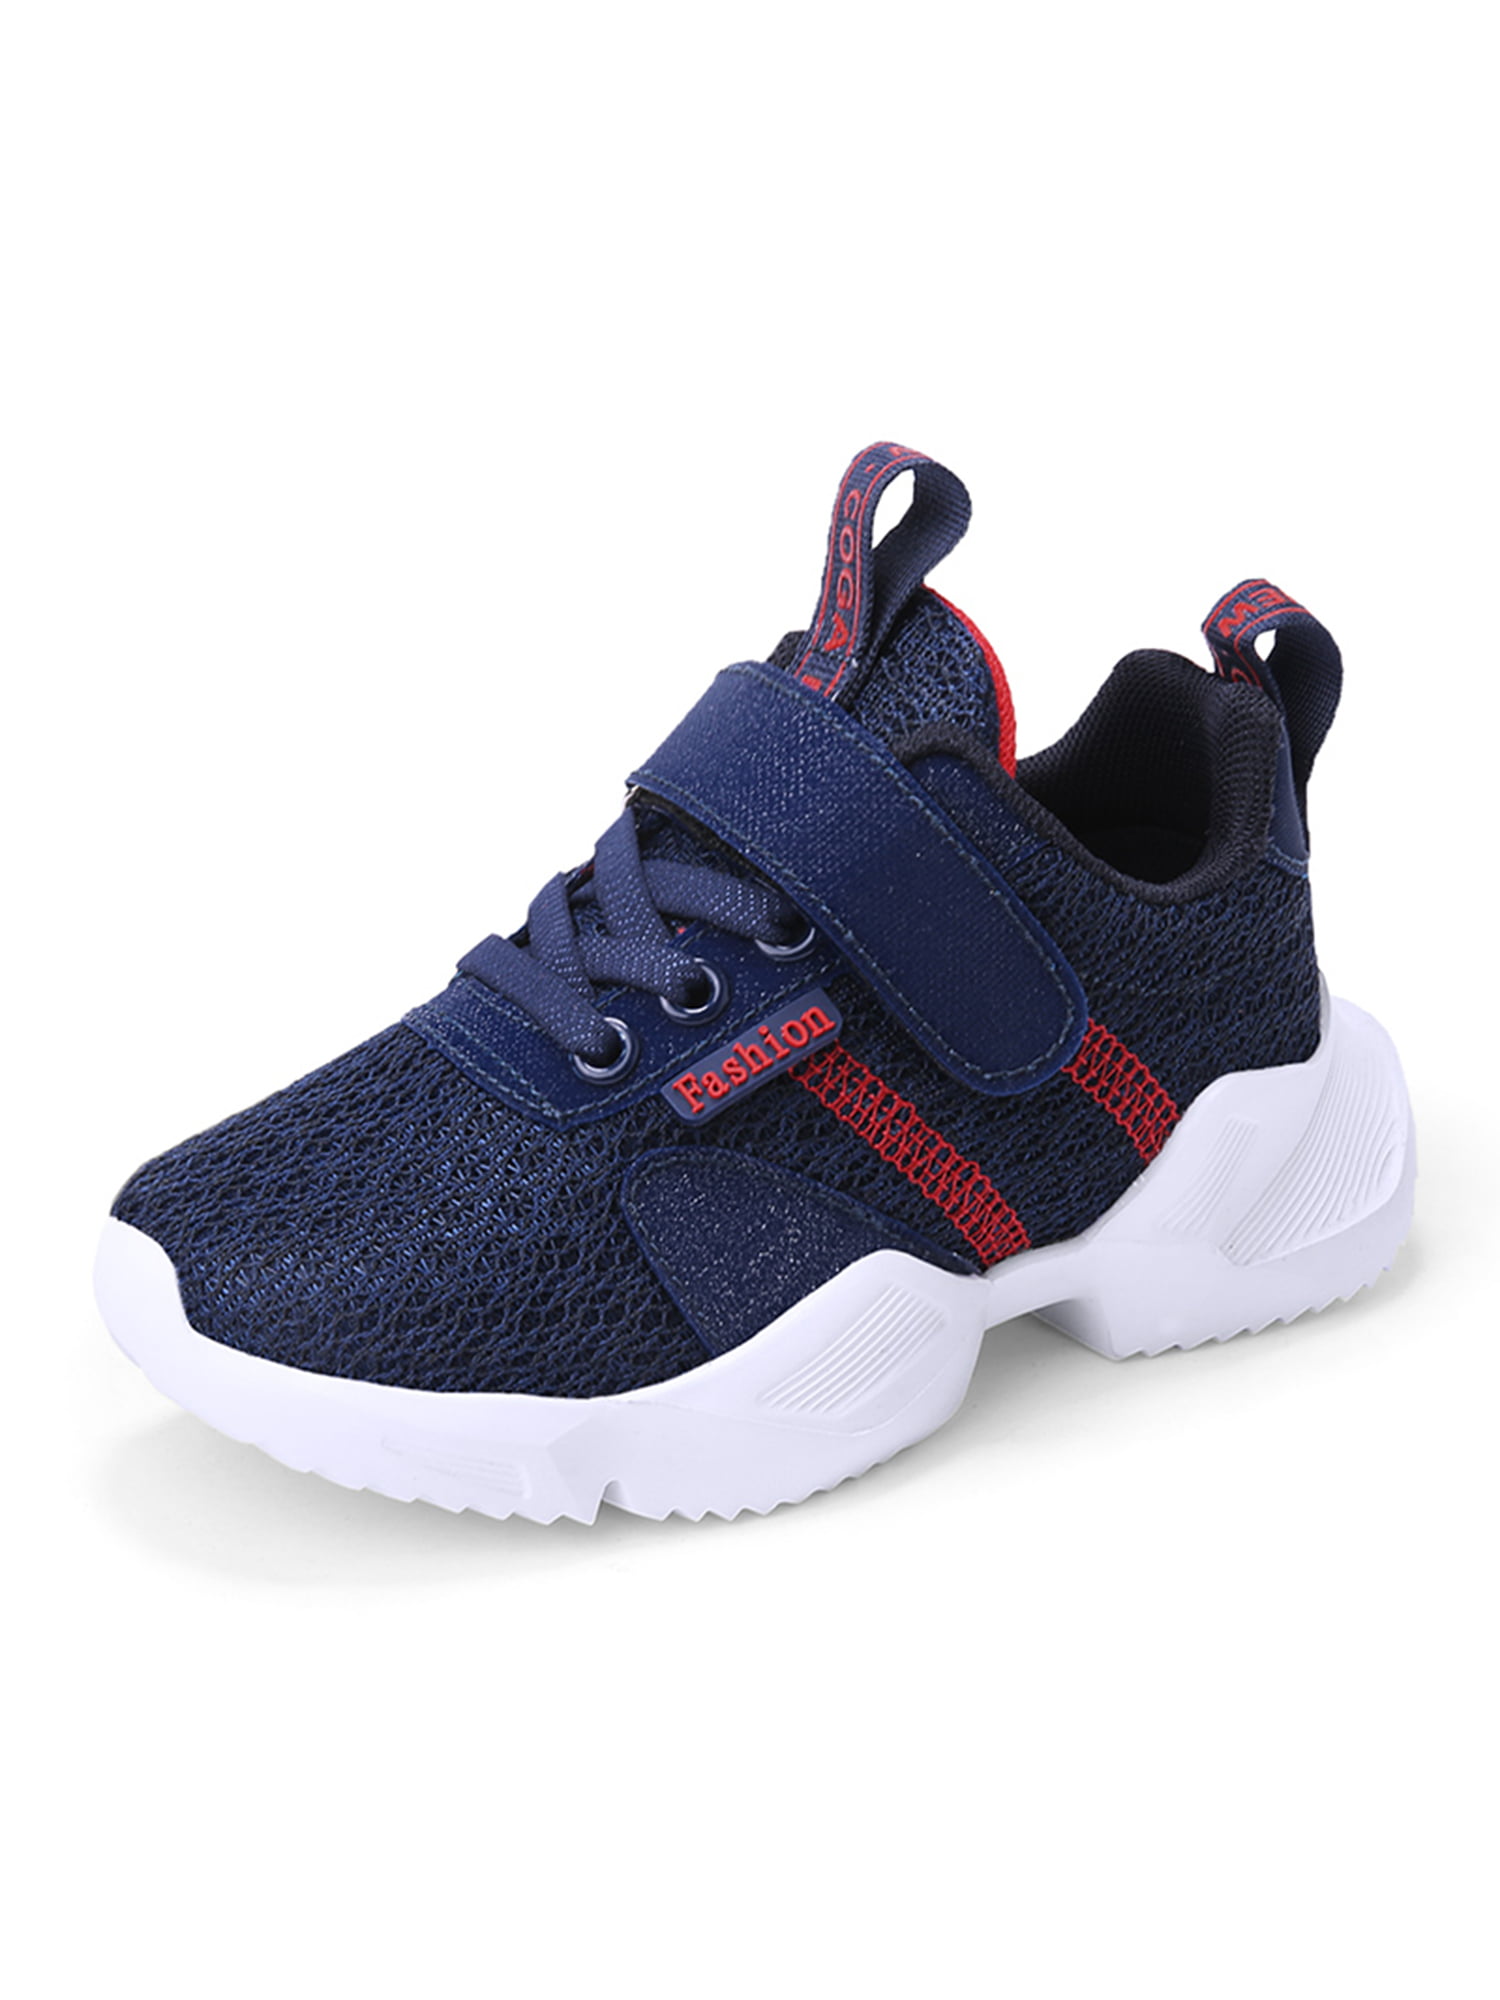 Little Kid/Big Kid F-OXMY Boys Outdoor Breathable Sneakers Casual Strap Athletic Running Shoes